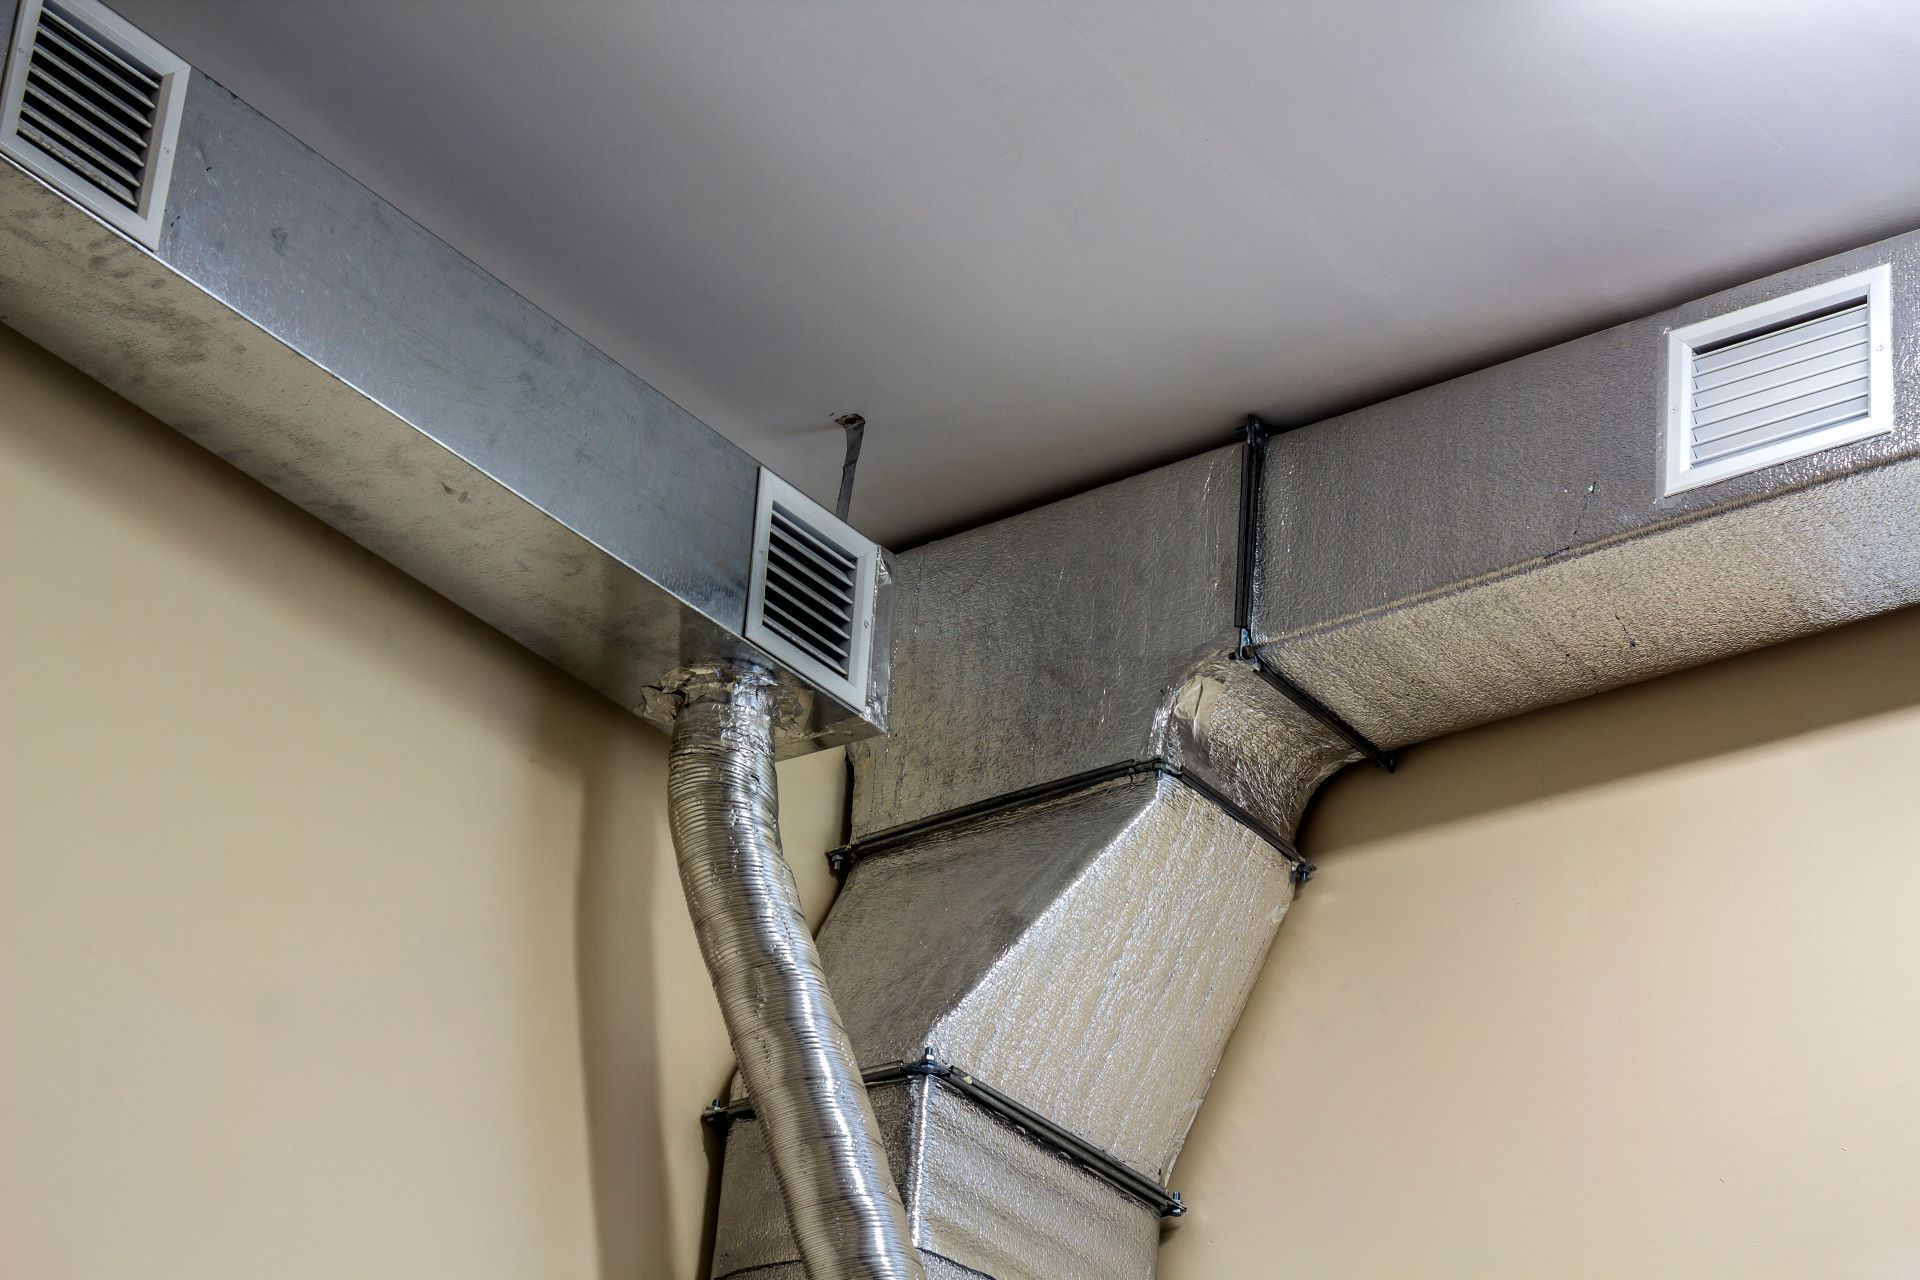 duct ventilation on ceiling and wall